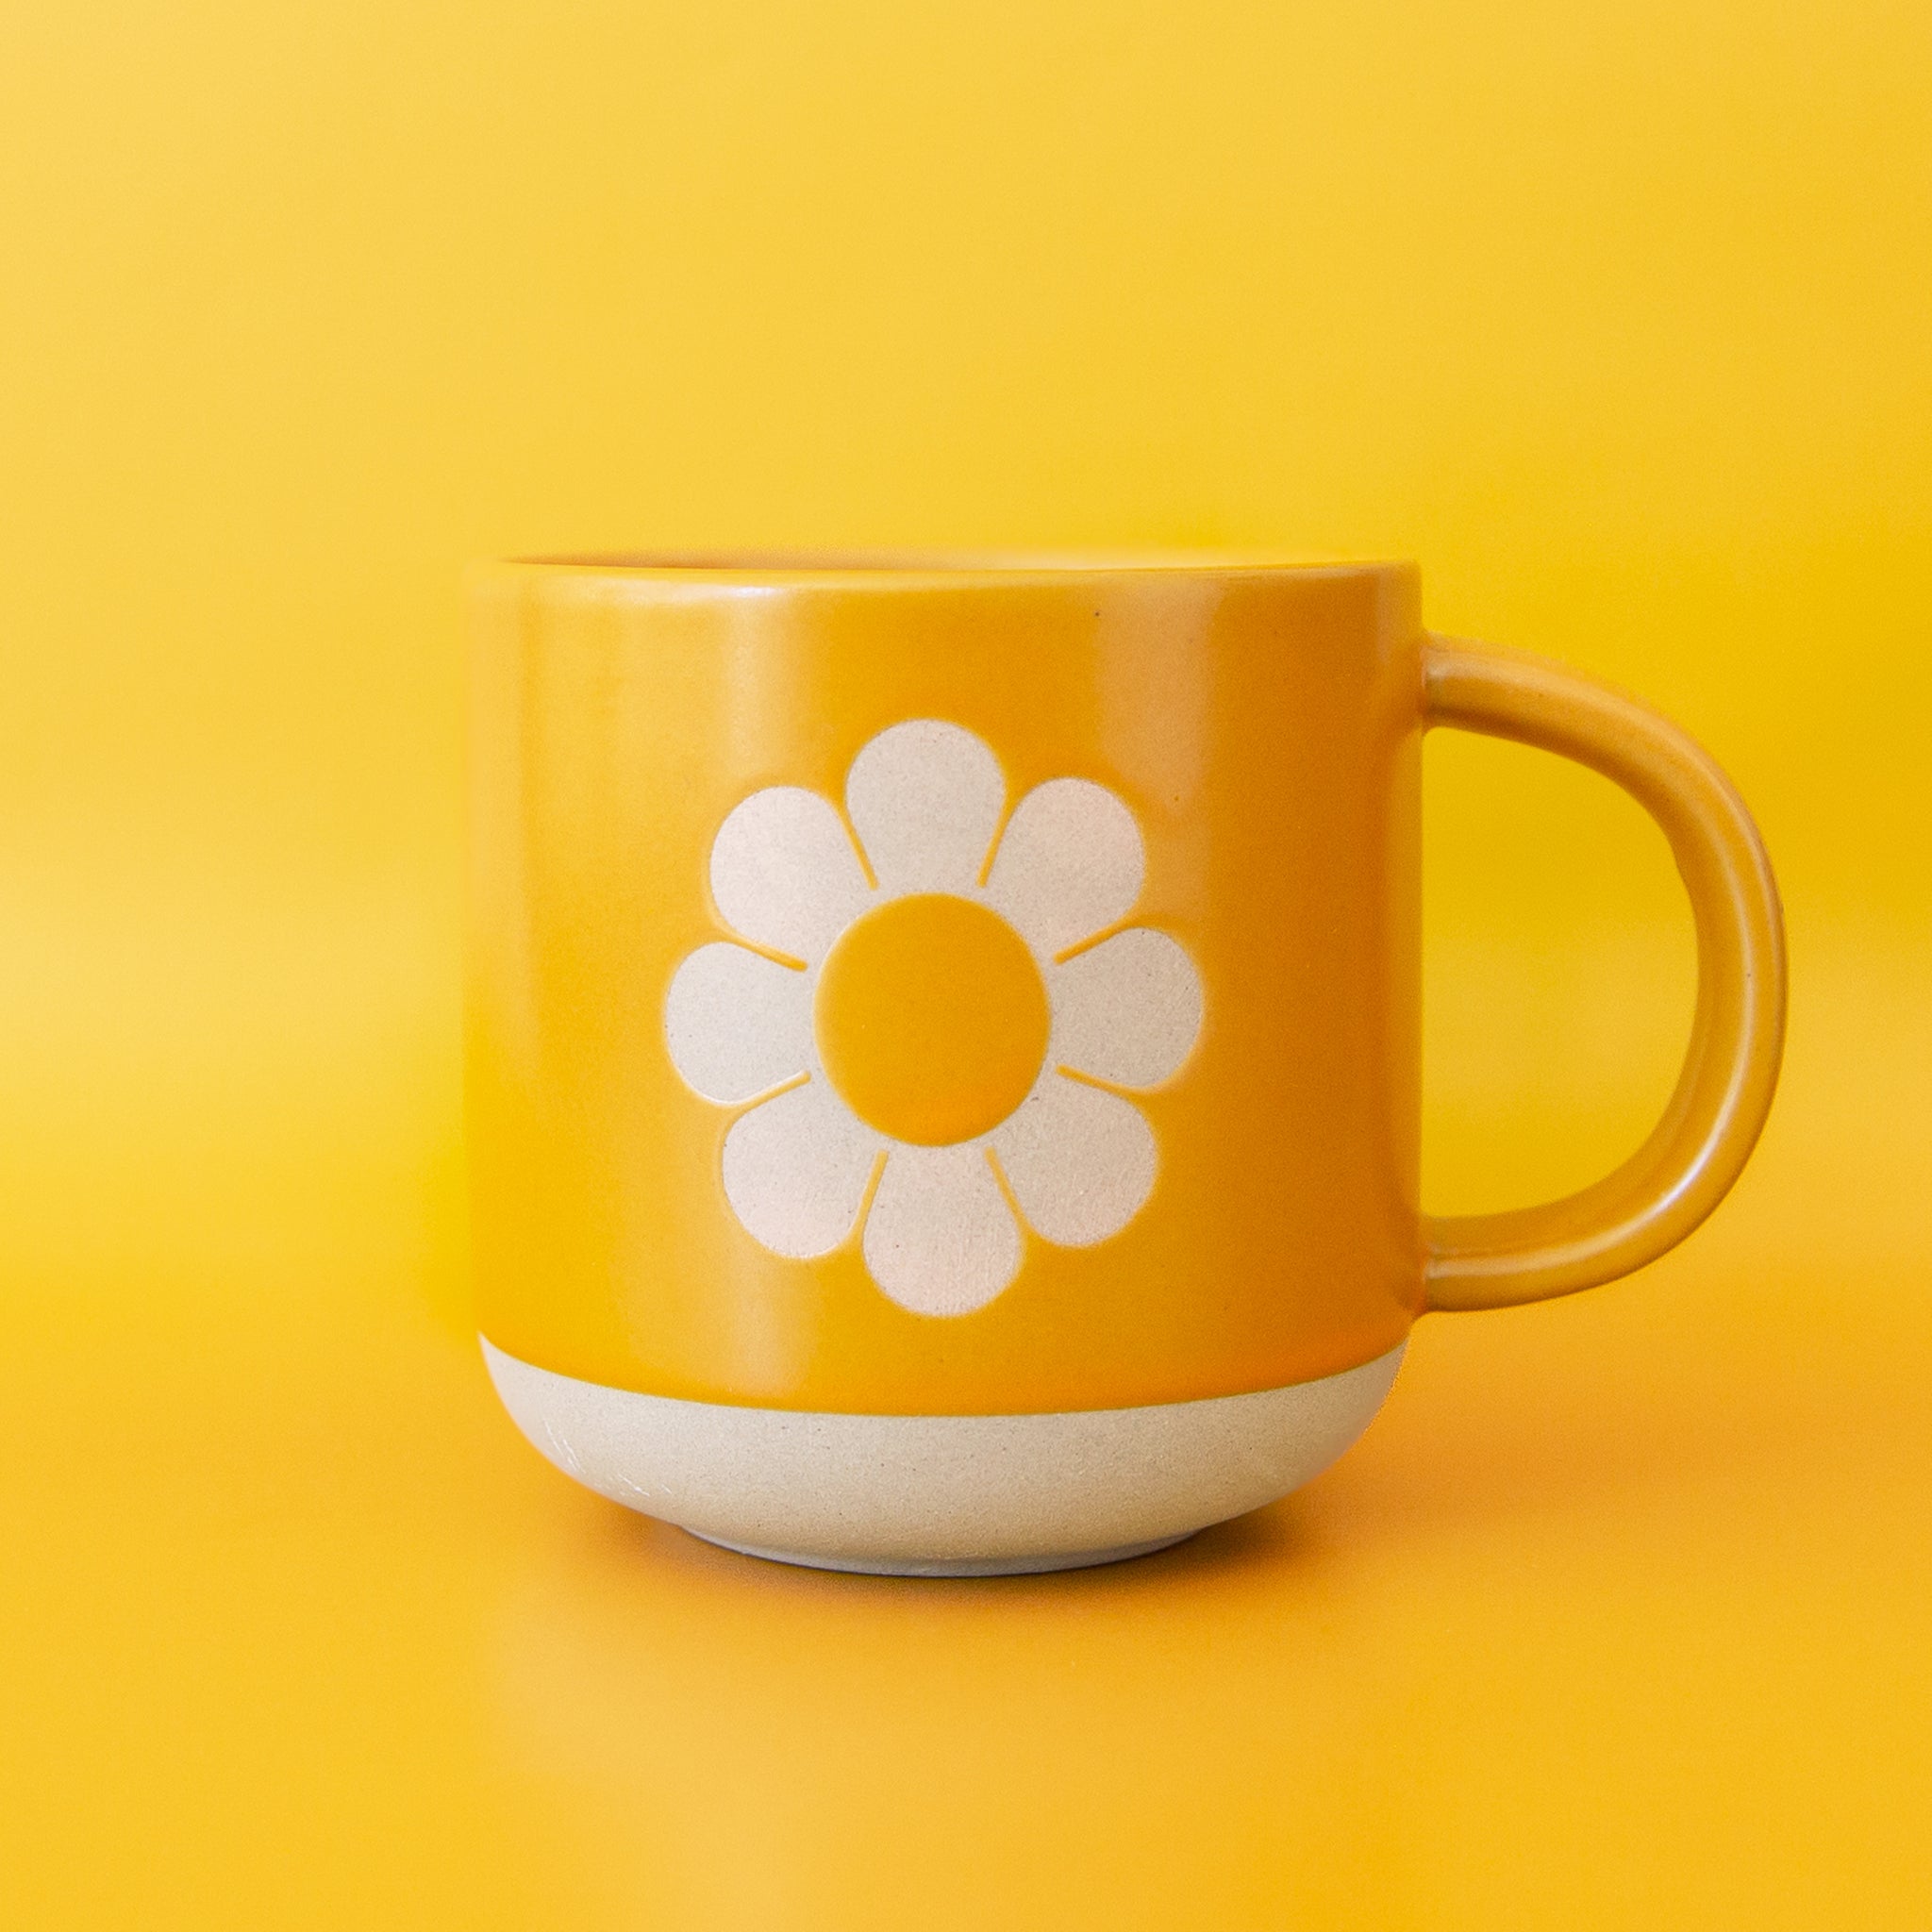 Natural clay mug painted tangerine orange with silhouette of classic daisy flower on the front. The base of the mug is unpainted, revealing natural clay.